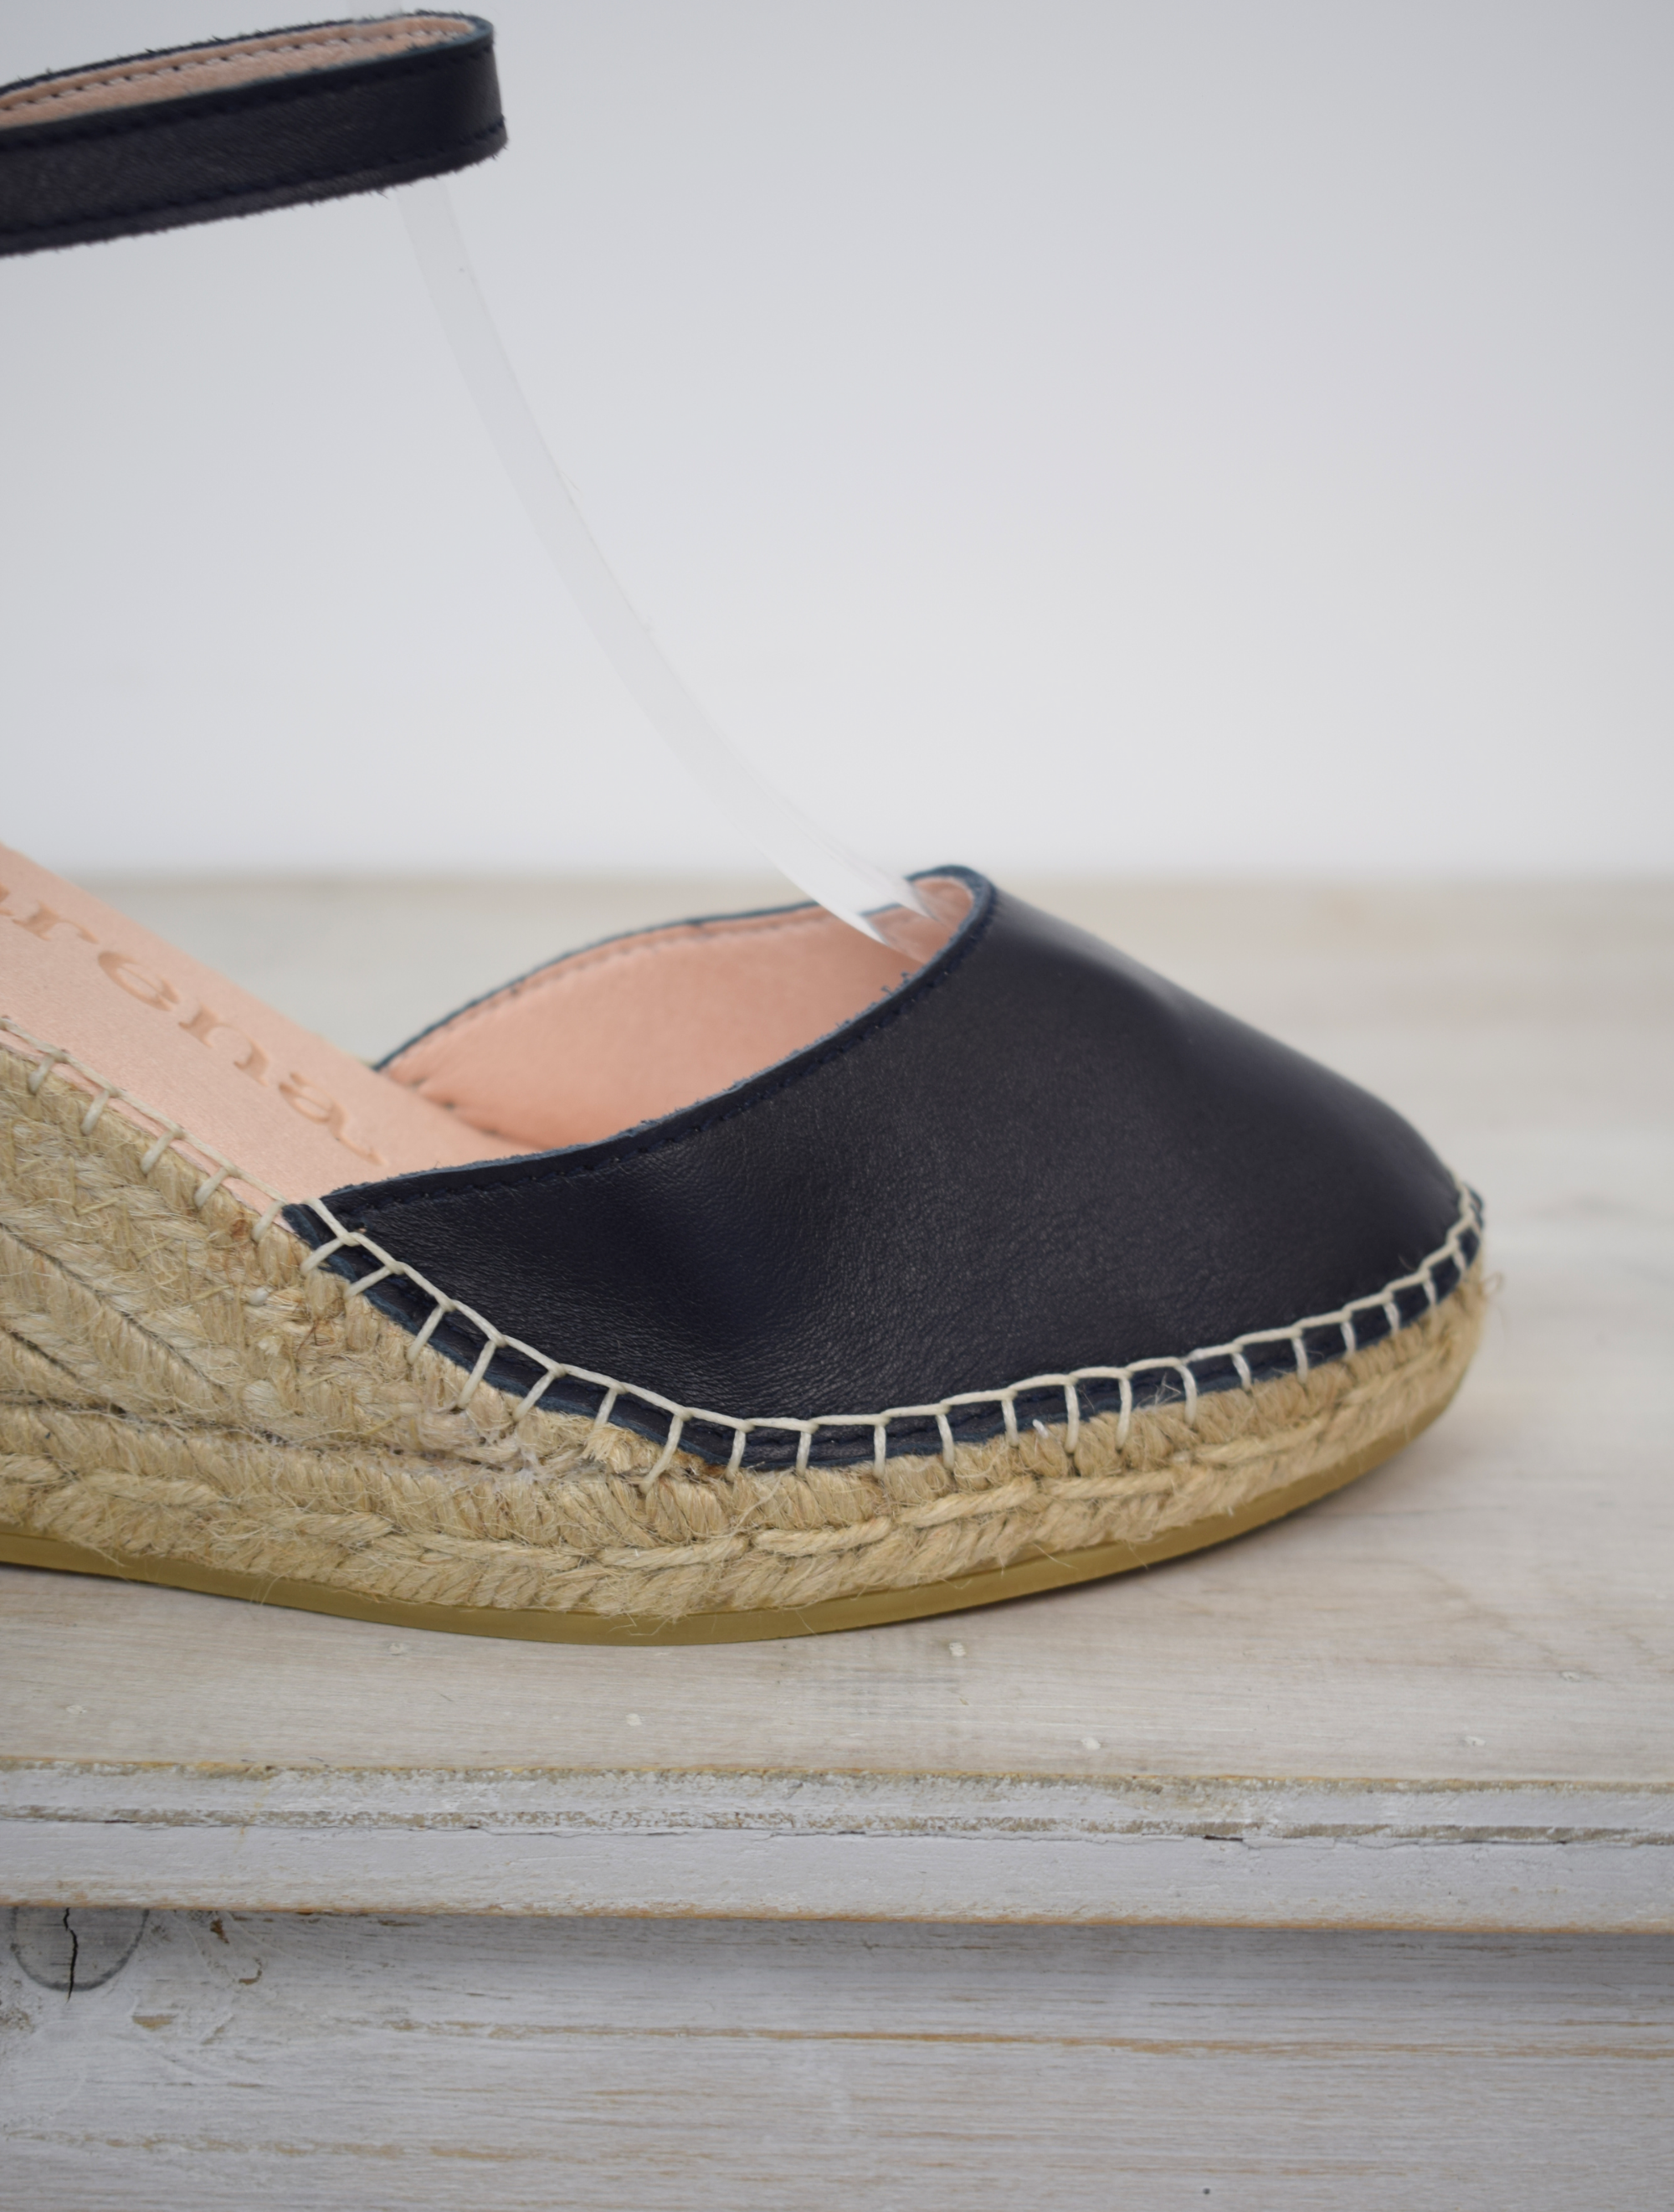 Closed toe navy espadrille with leather upper and strap